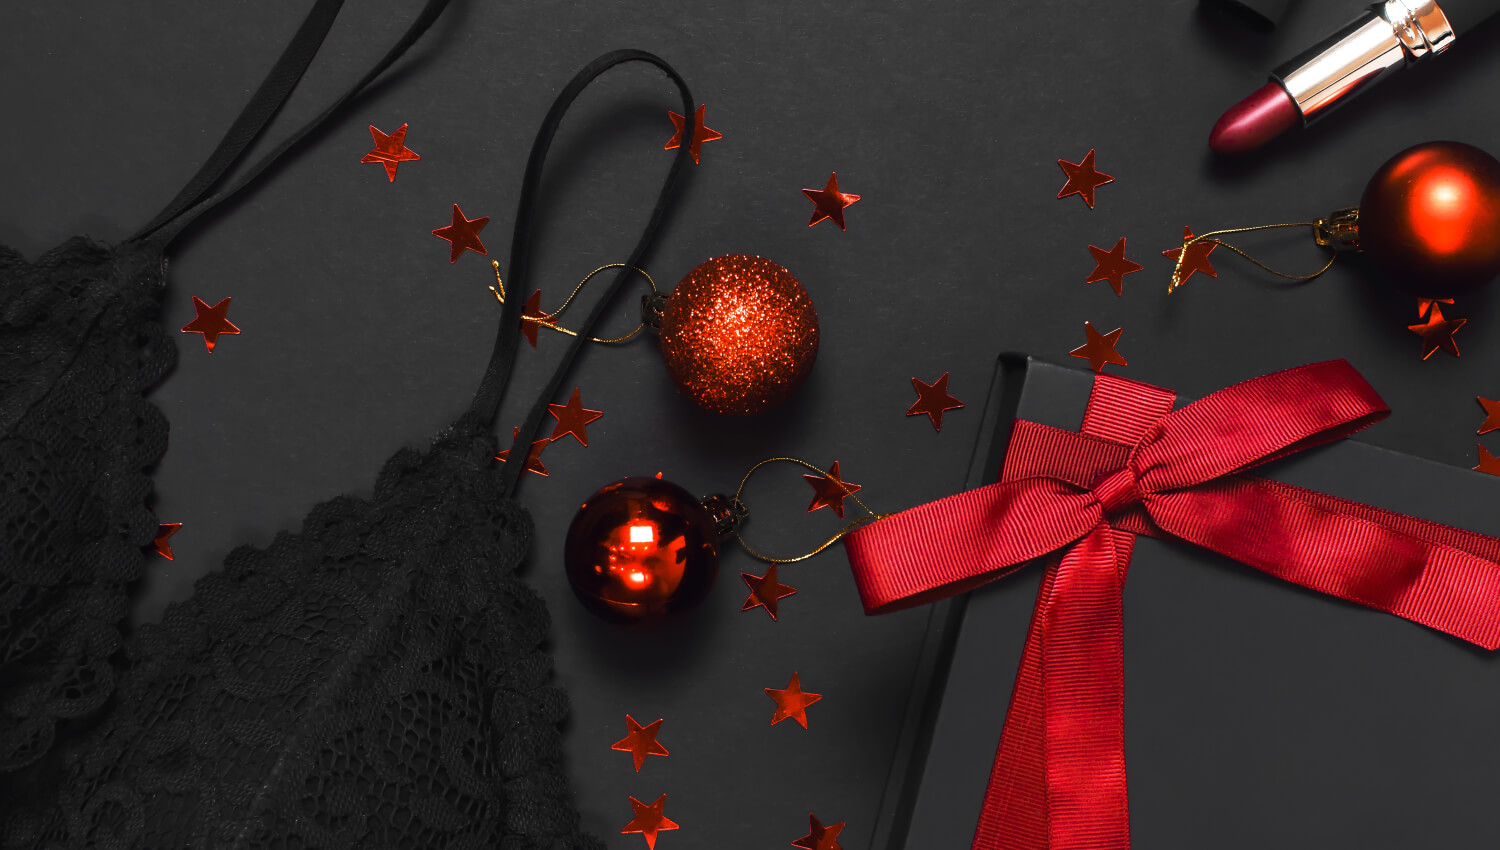 black-gift-box-with-red-ribbon-lace-bra-underwear-red-lipstick-Christmas-balls-holographic-confetti-on-dark-background-top-view-flat-lay-female-essential-accessories